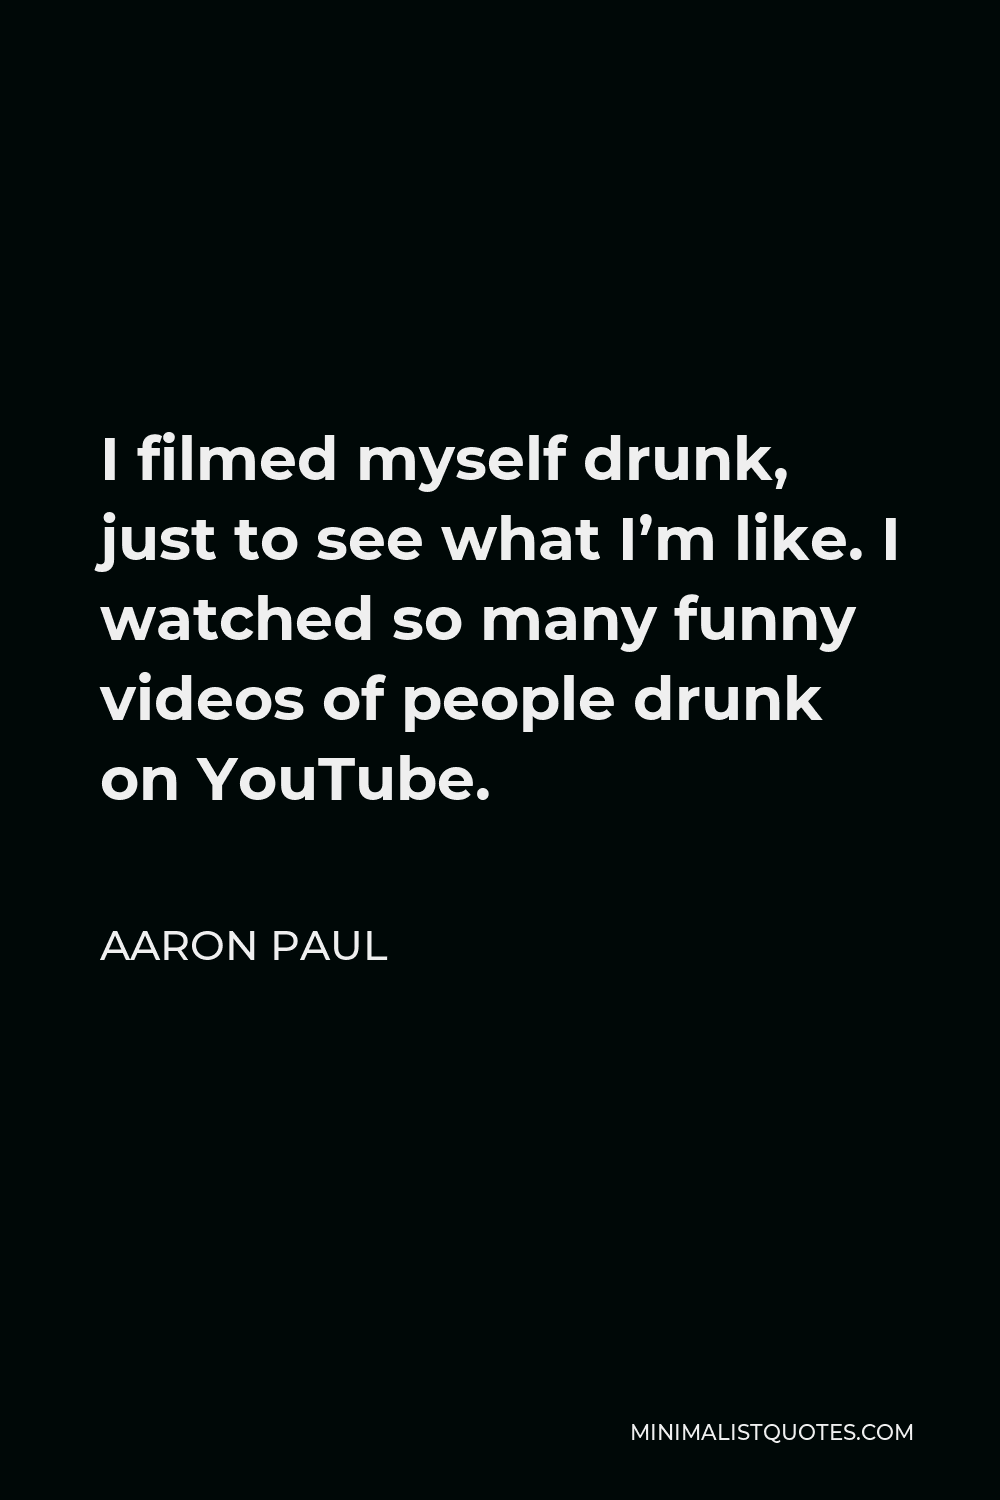 Aaron Paul Quote: I filmed myself drunk, just to see what I'm like. I  watched so many funny videos of people drunk on YouTube.